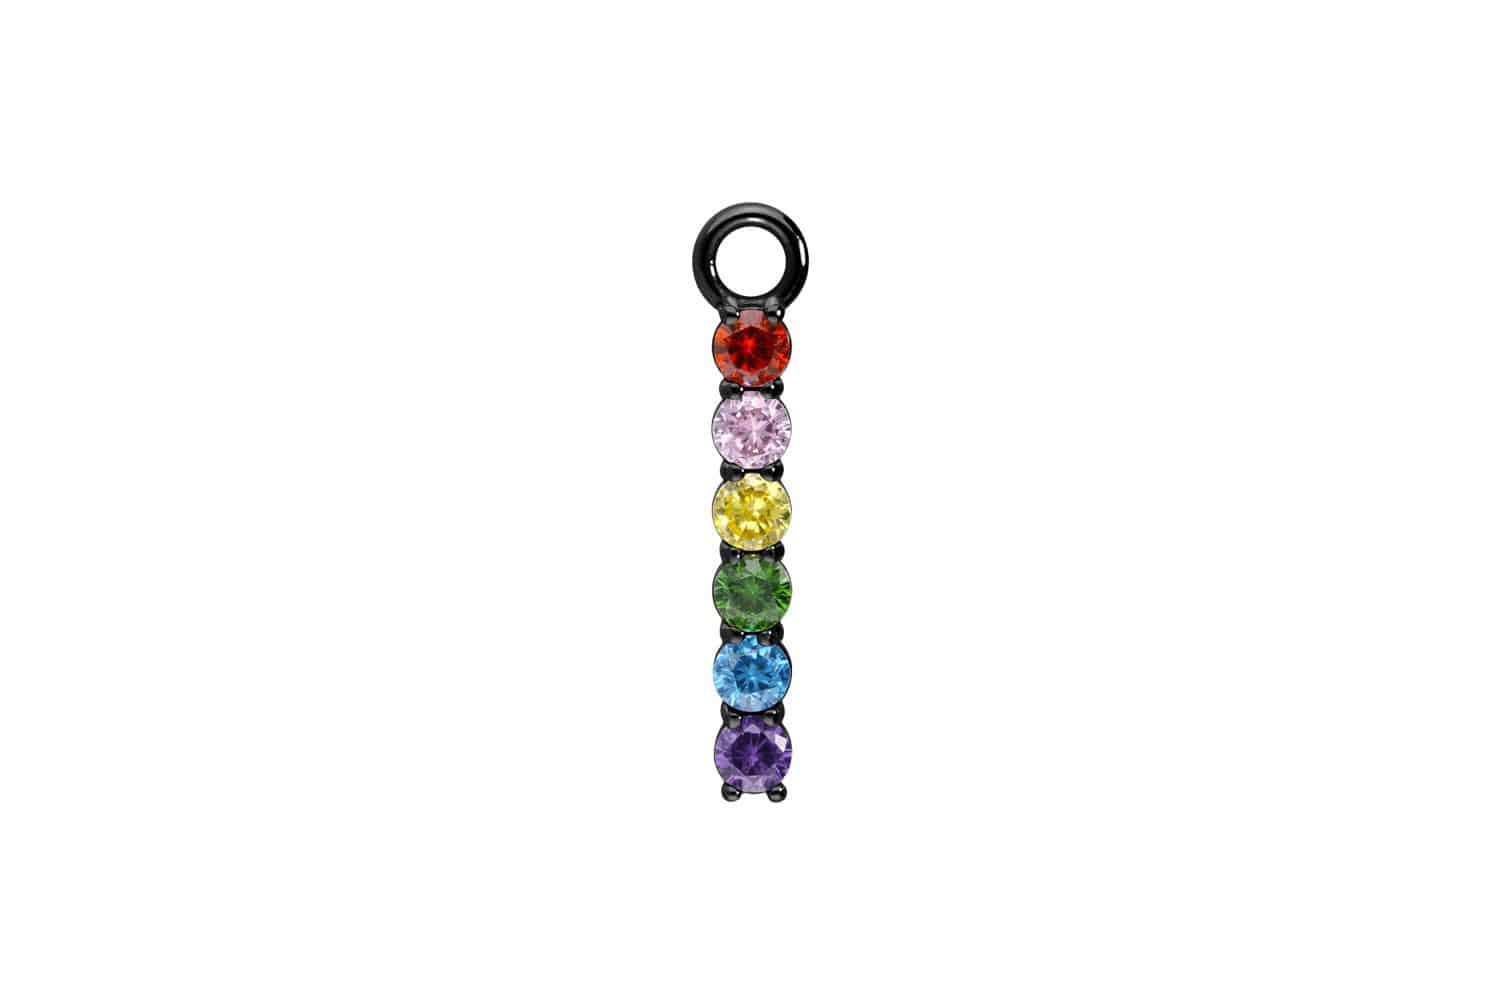 Surgical steel pendant for clickers MULTICOLORED CRYSTAL BAR